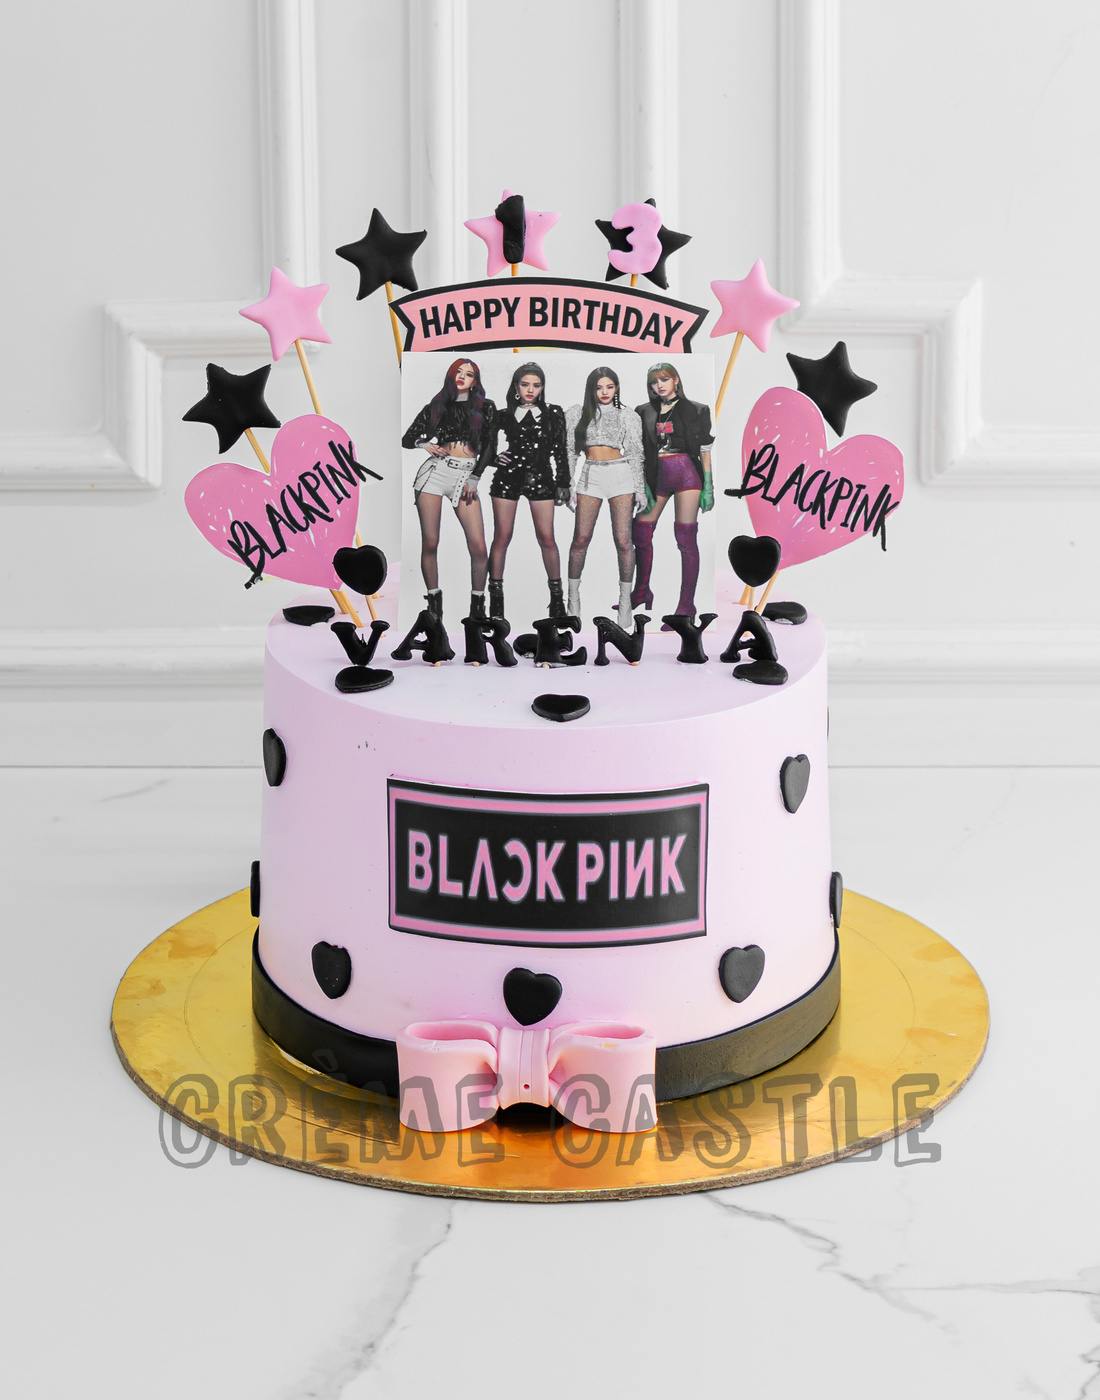 Blackpink Theme Cake in Pink by Creme Castle